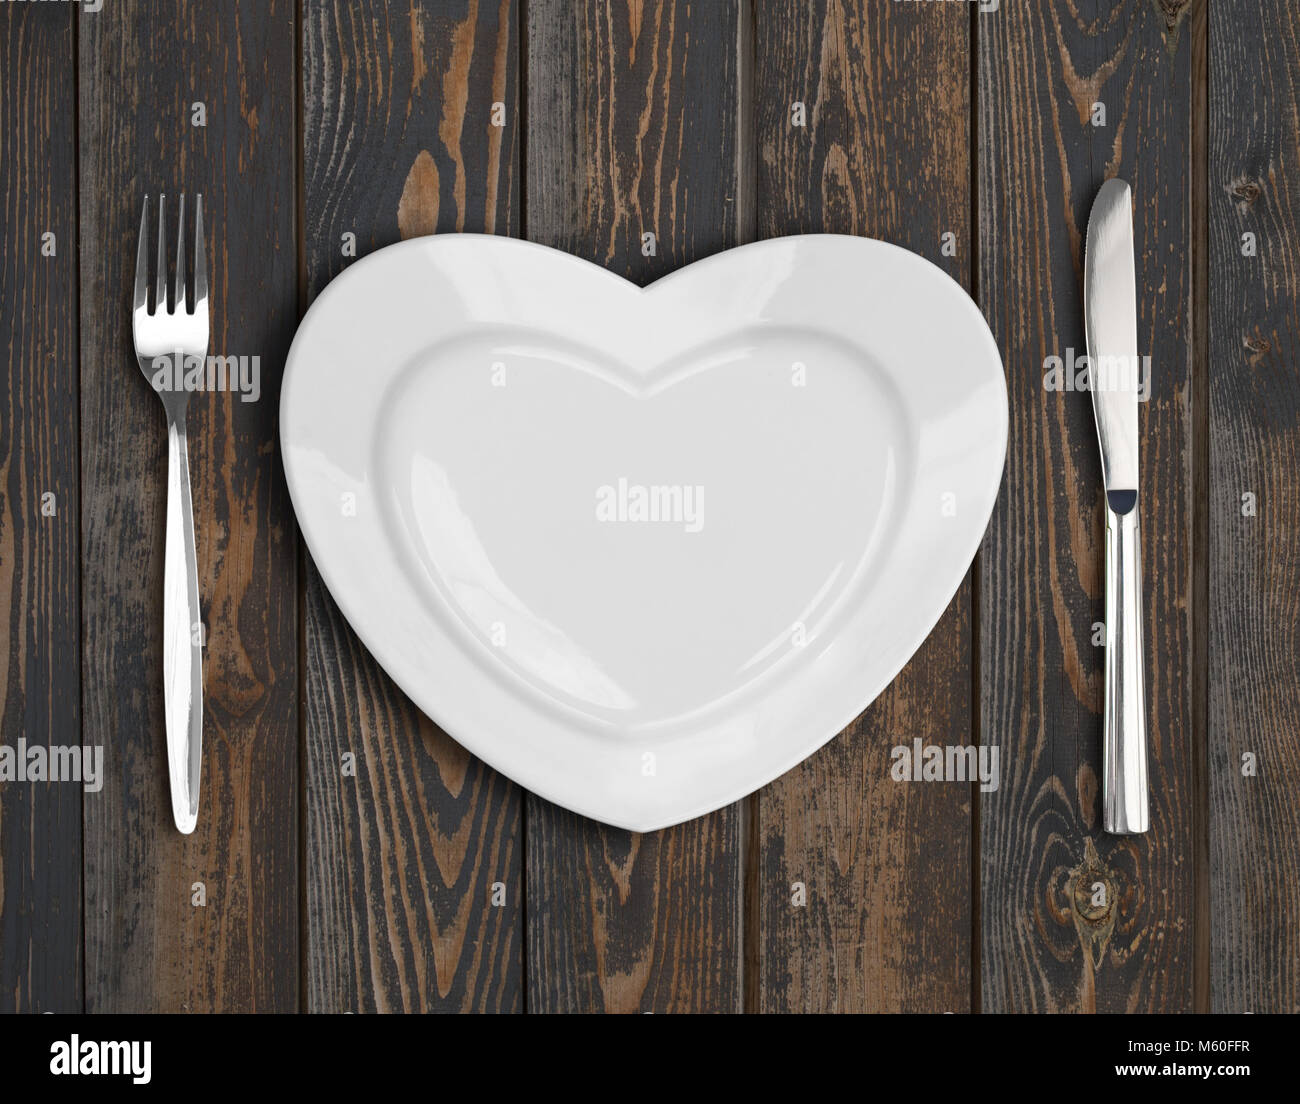 empty heart plate top view on wood table Stock Photo